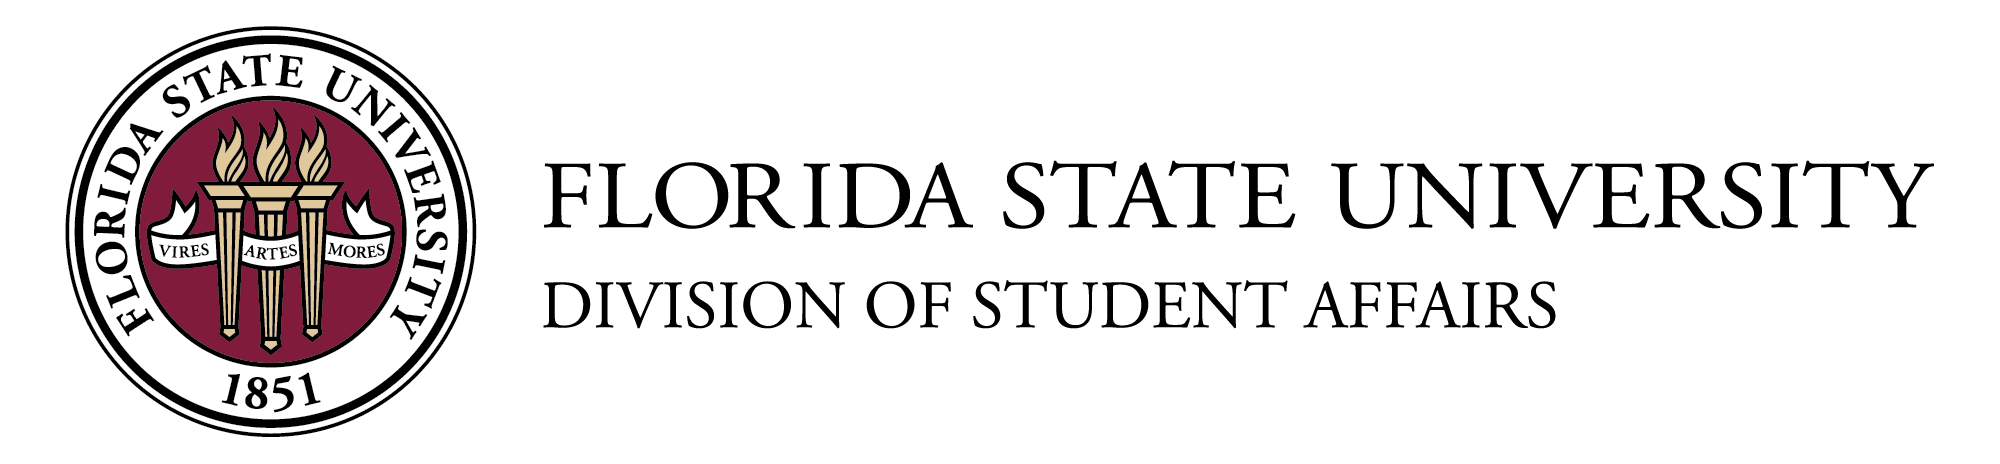 Division of Student Affairs at Florida State University Logo